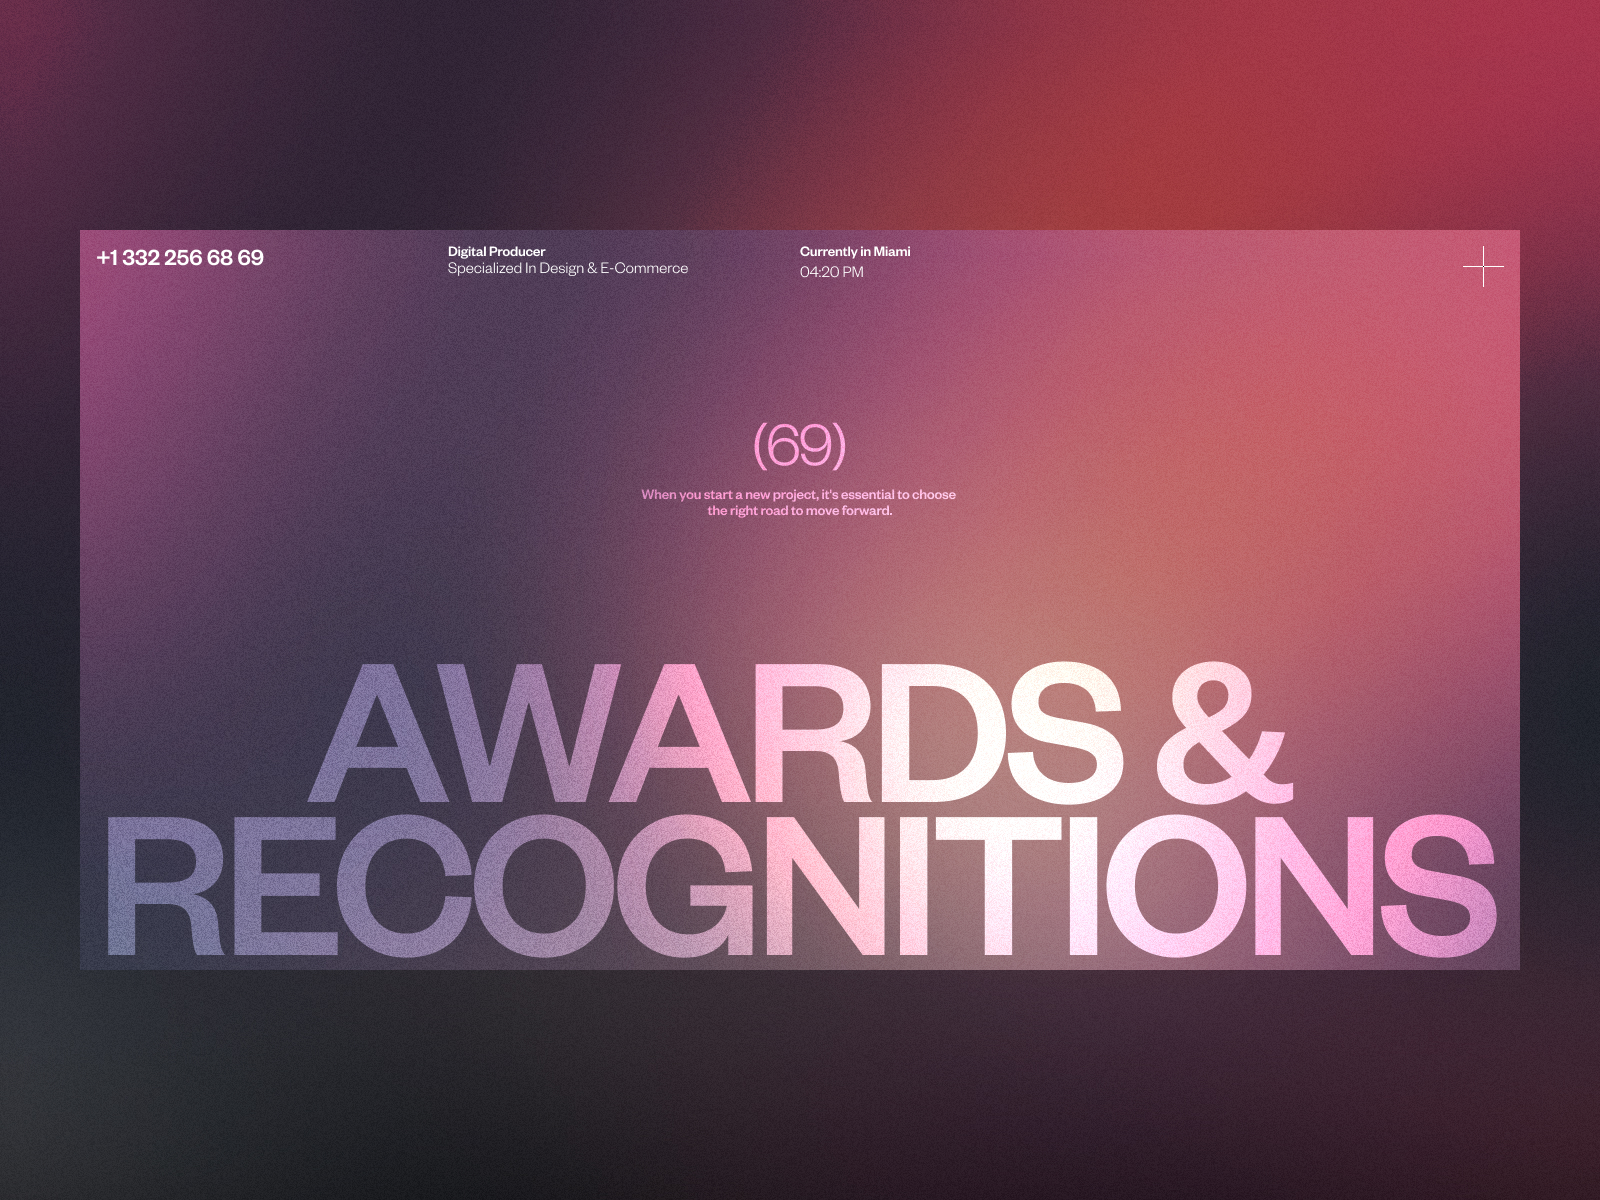 Awards & Recognitions Page